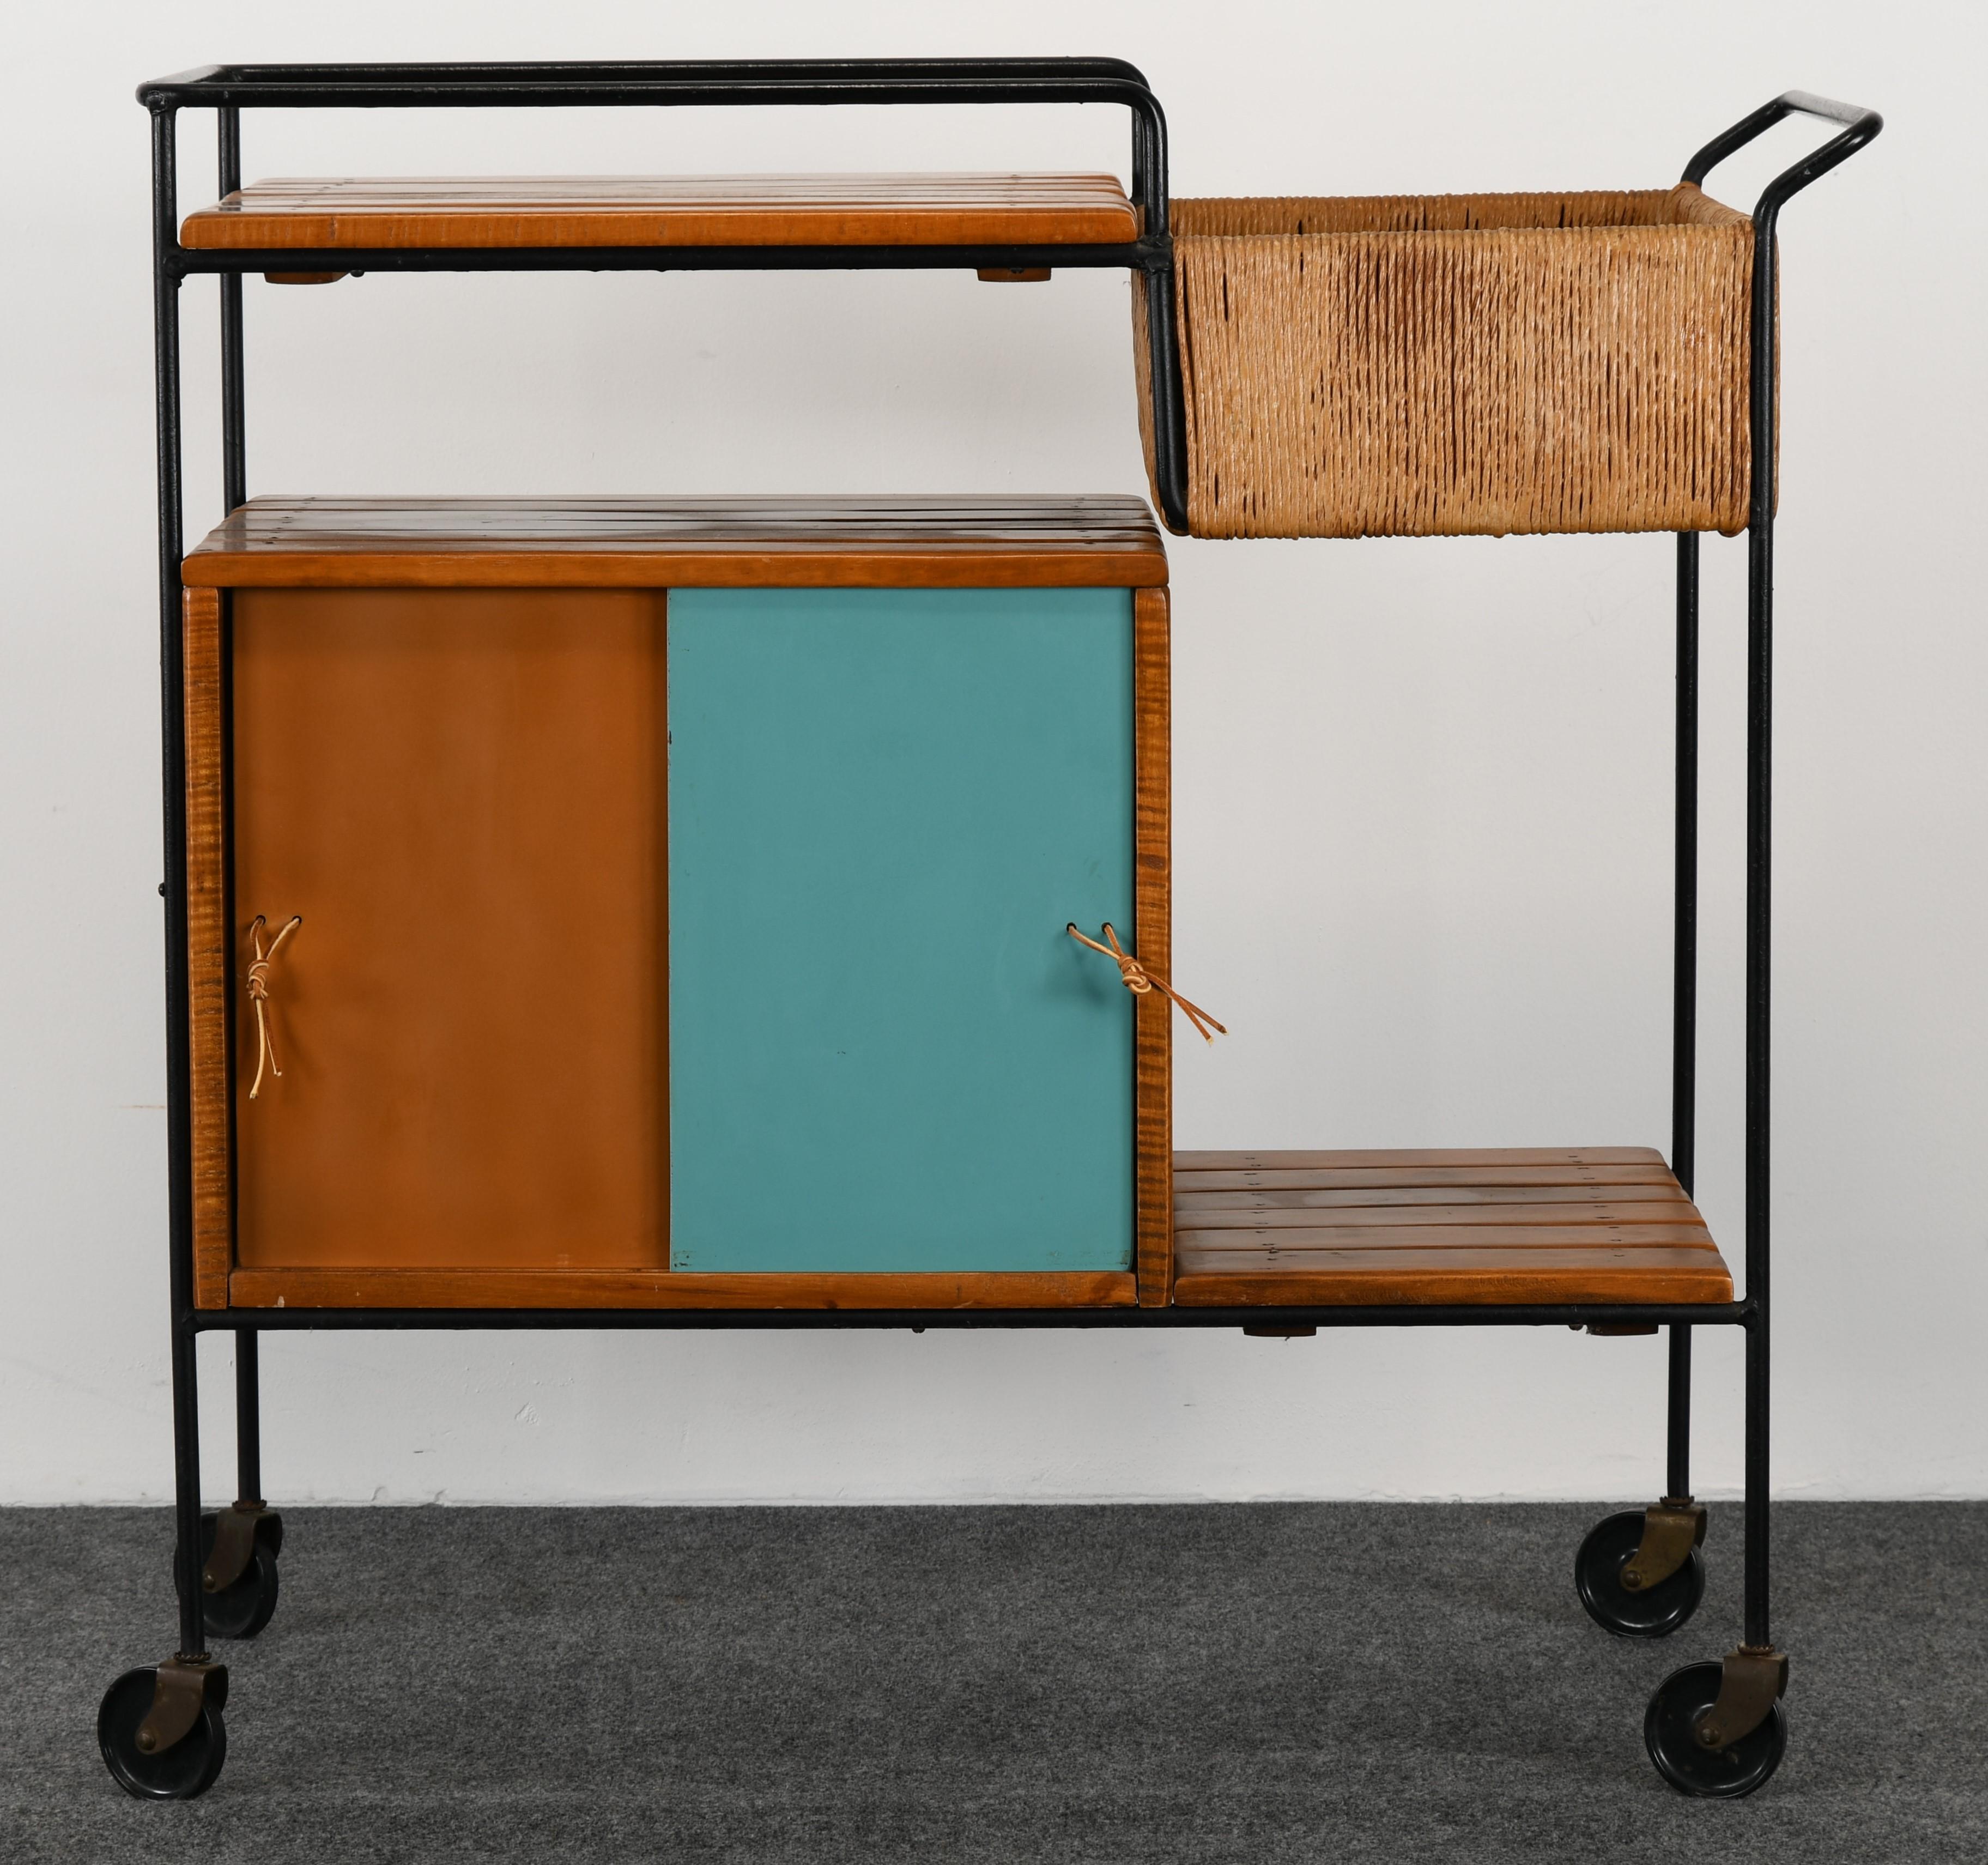 A vintage Mid-Century Modern rolling bar cart made of wrought iron, rope, and leather designed by Arthur Umanoff. This piece is in very good condition and has a rope sectioned carry all with three shelves constructed of maple wood. The doors consist